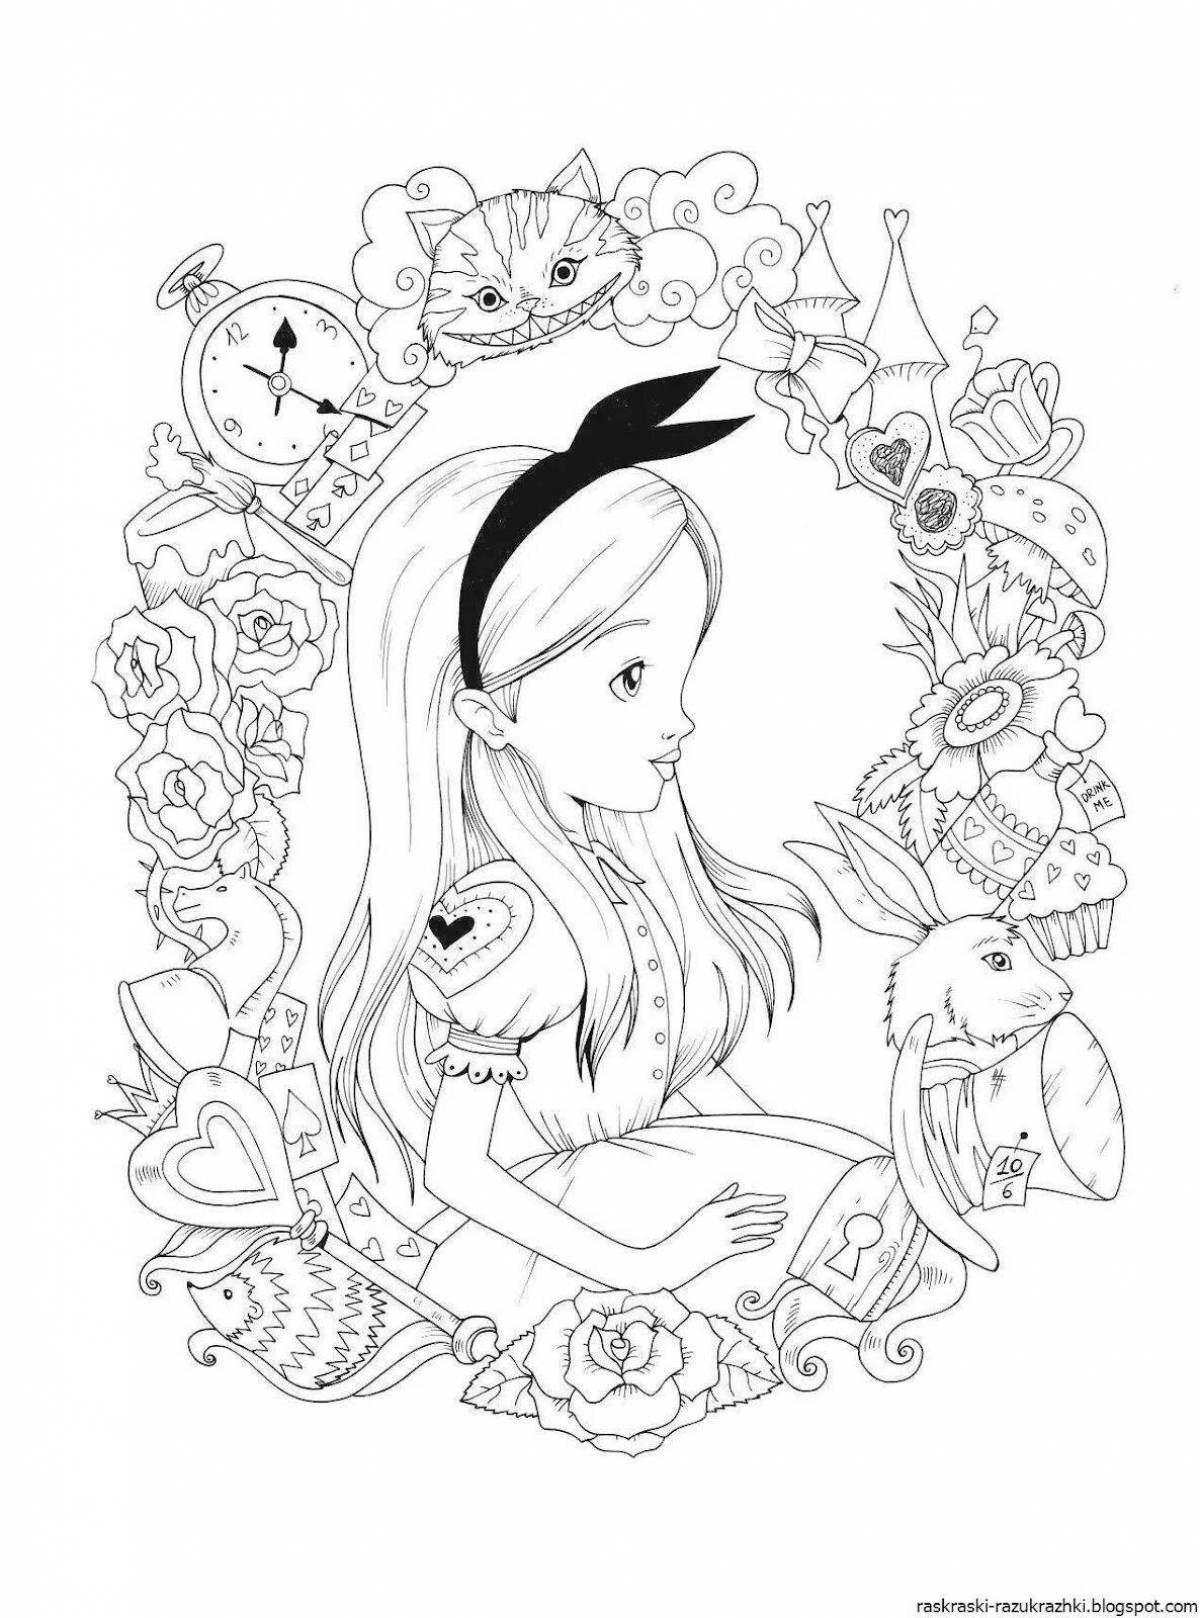 Witty alice coloring pages for girls